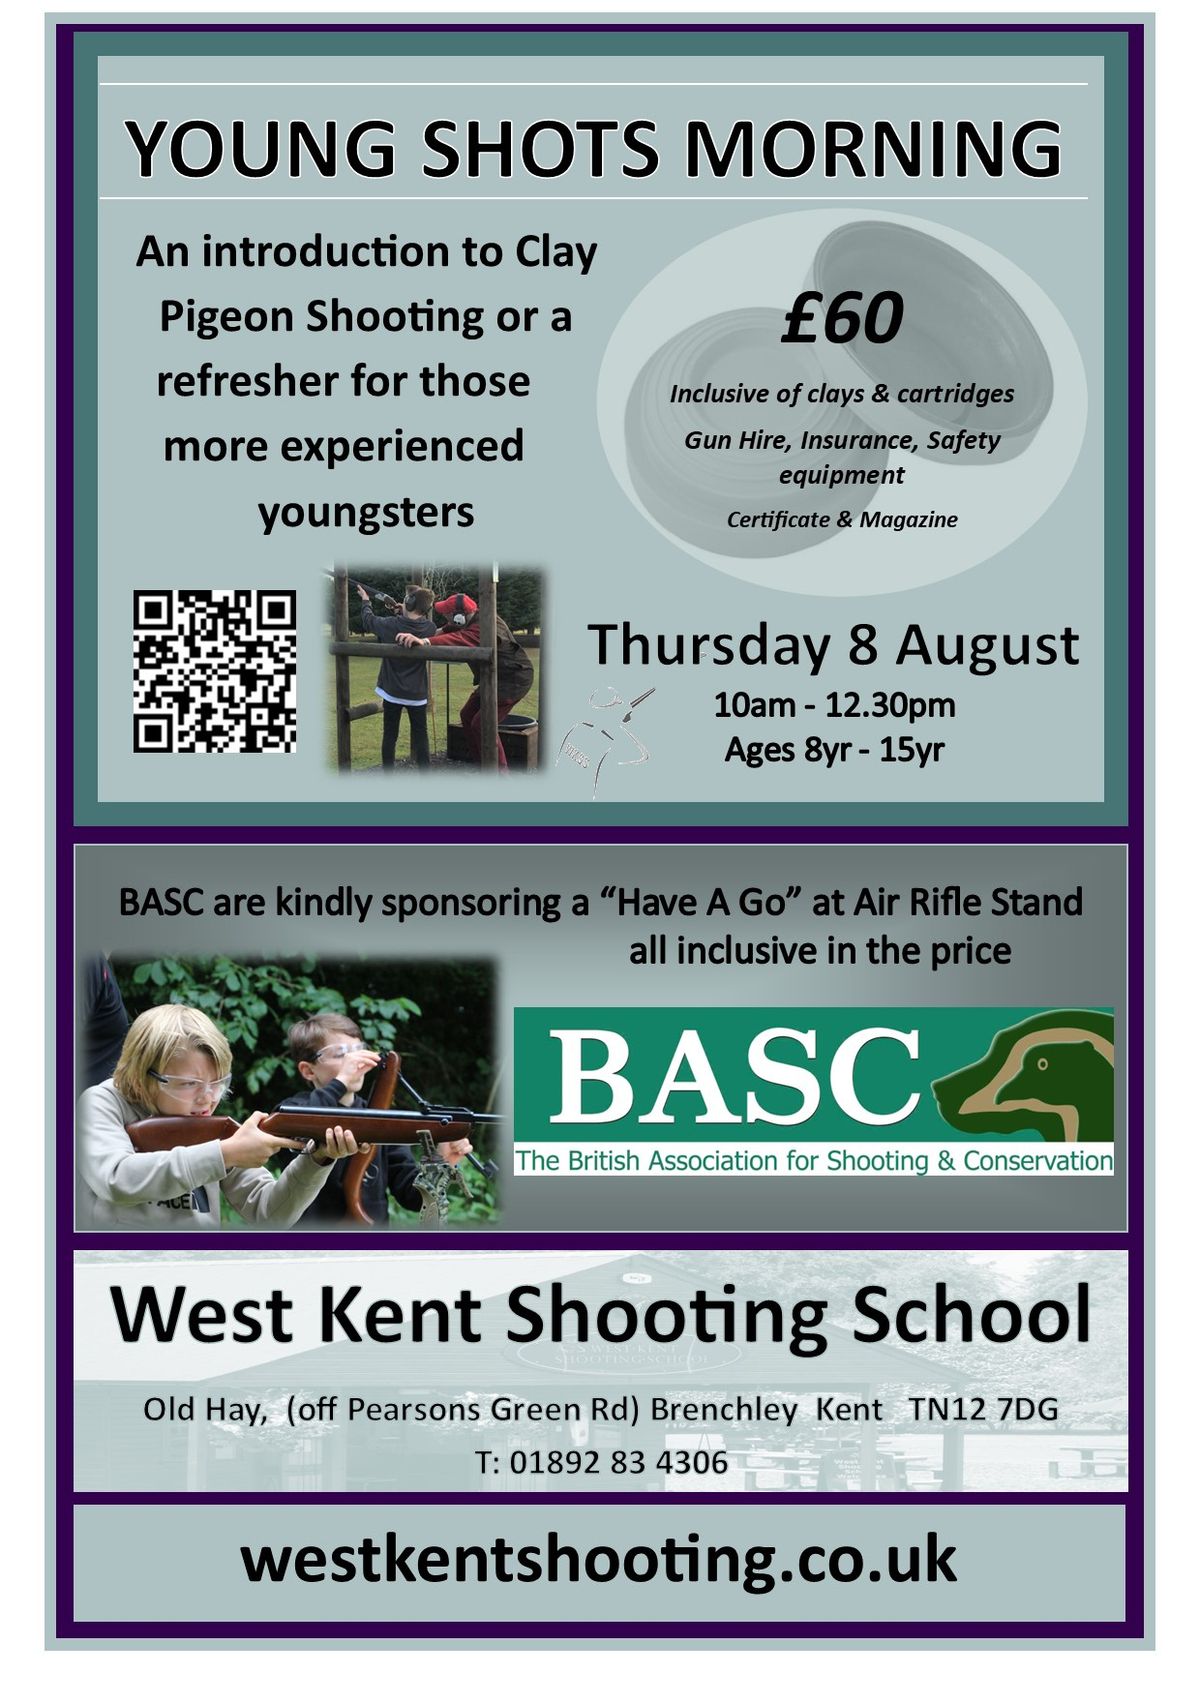 Youngs Shots Morning with BASC Air Rifle Range